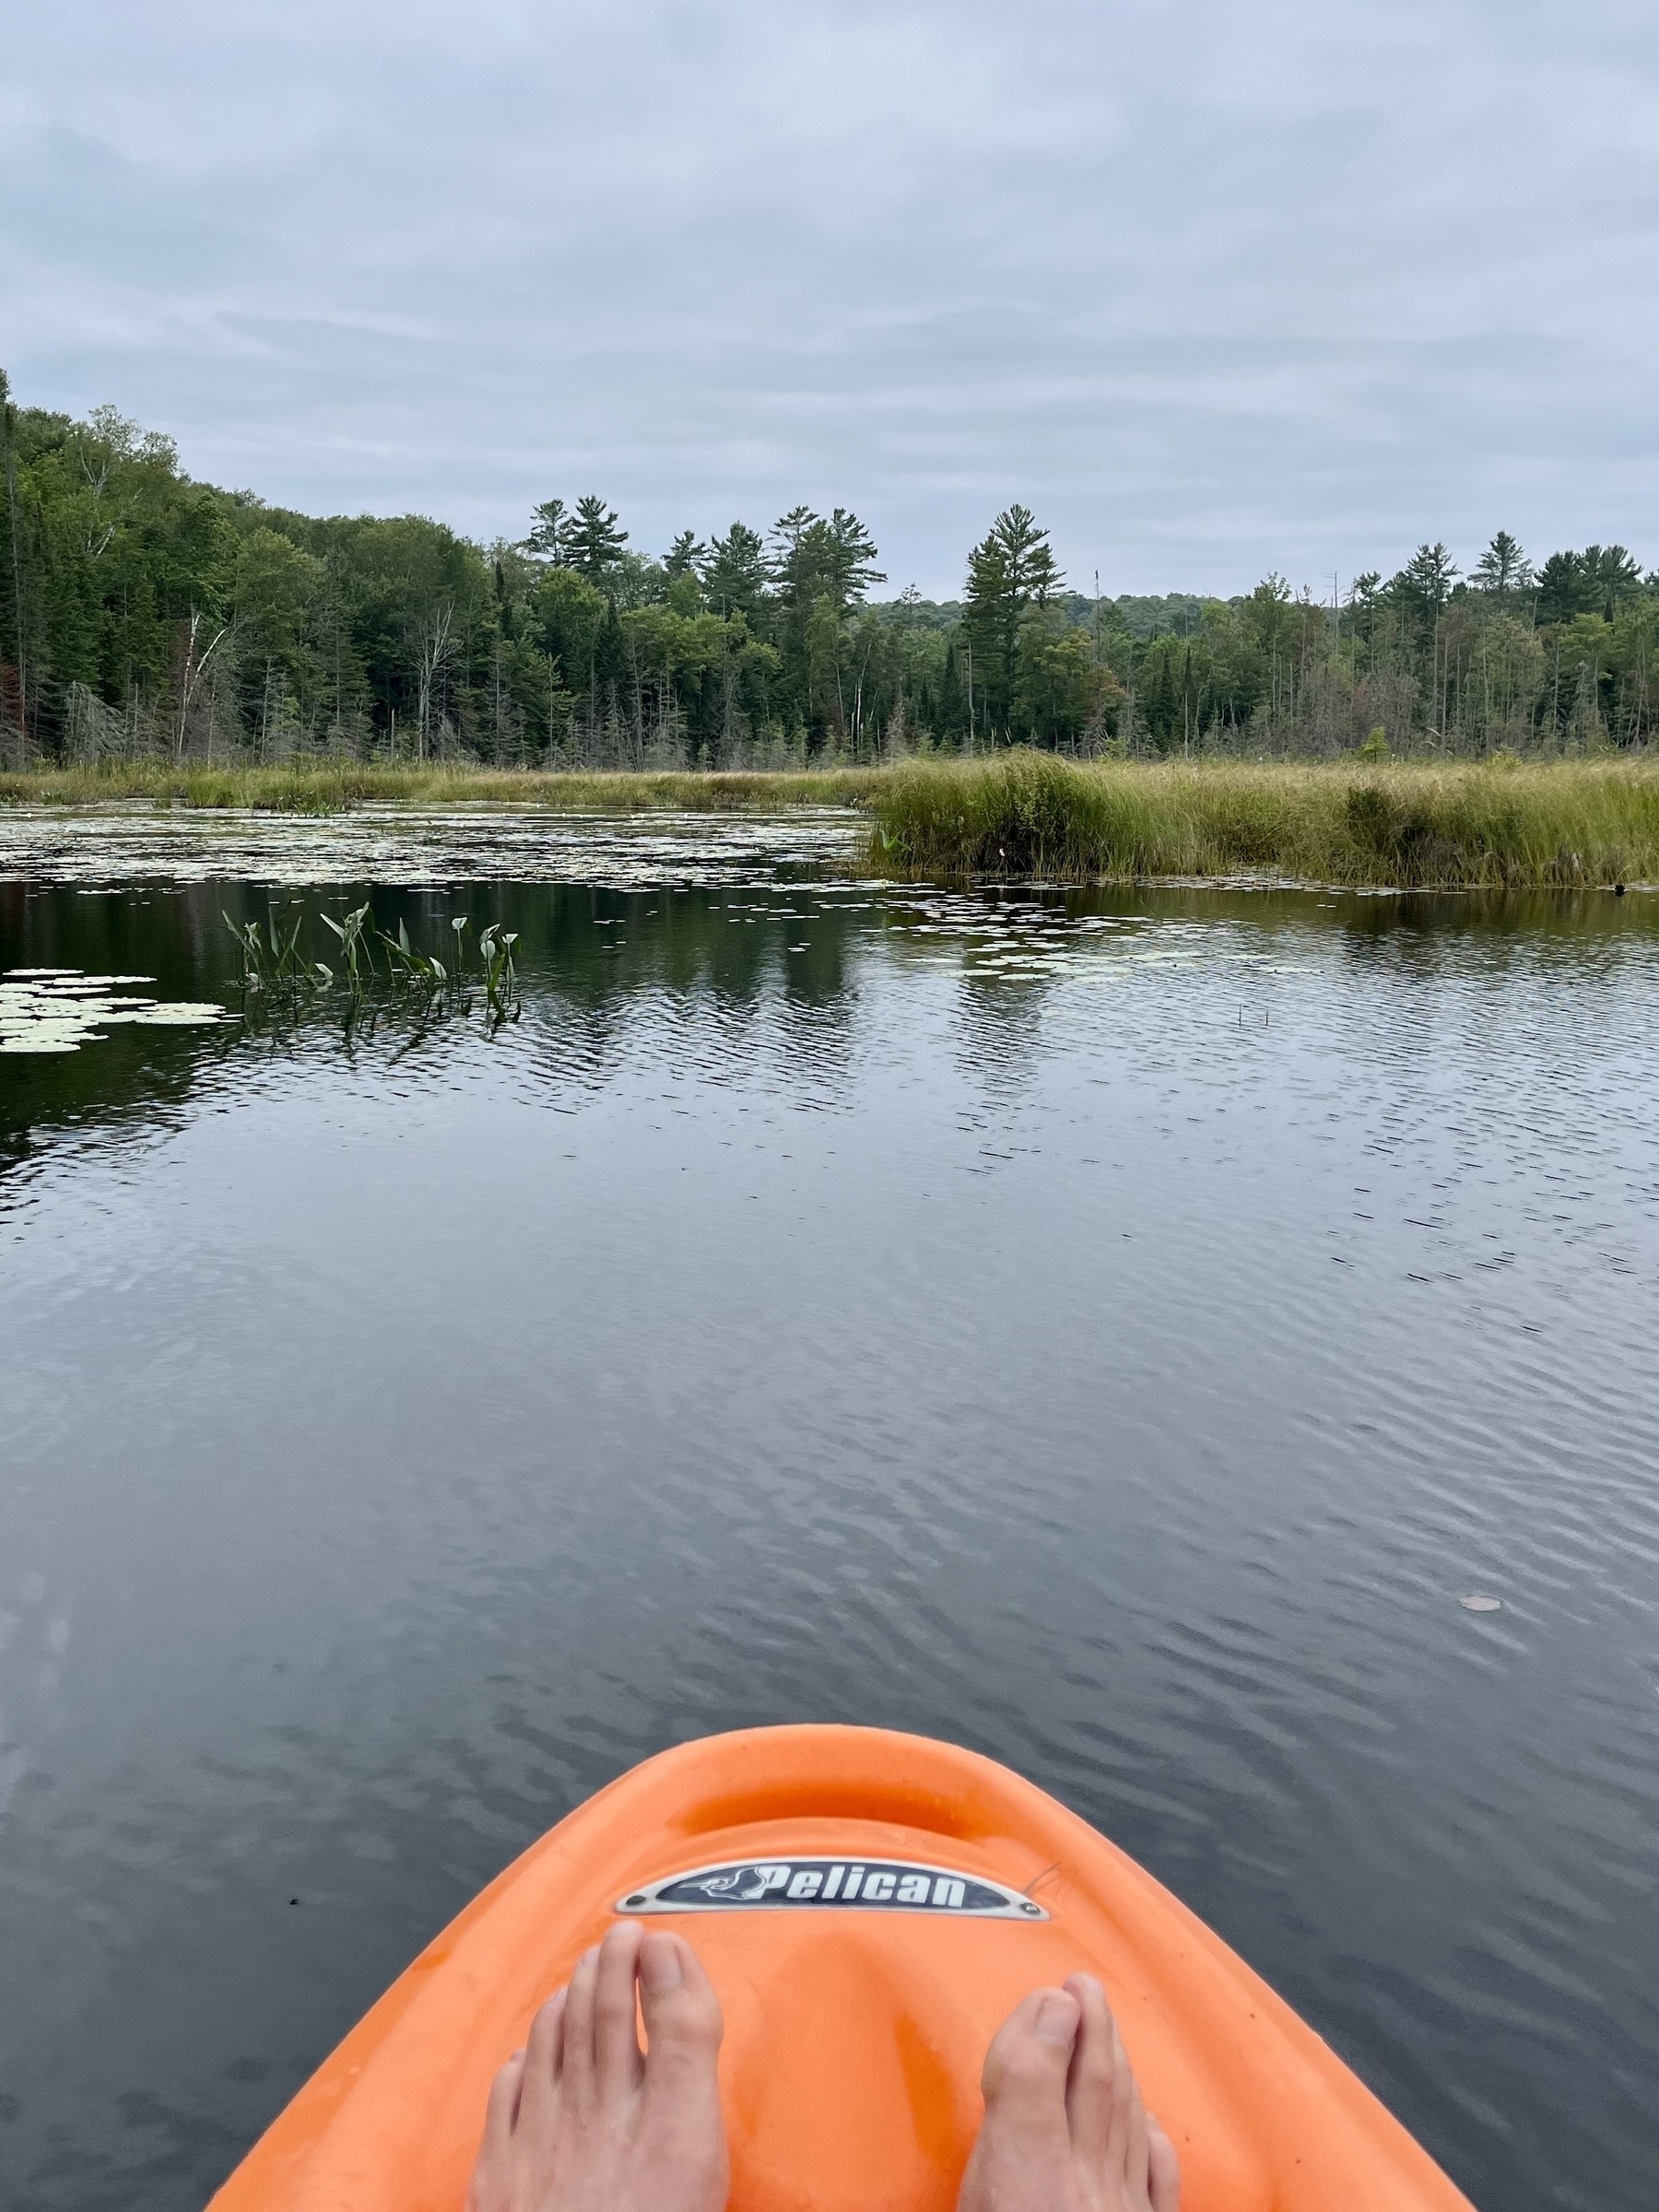 A view of the lake over the edge of the kayak